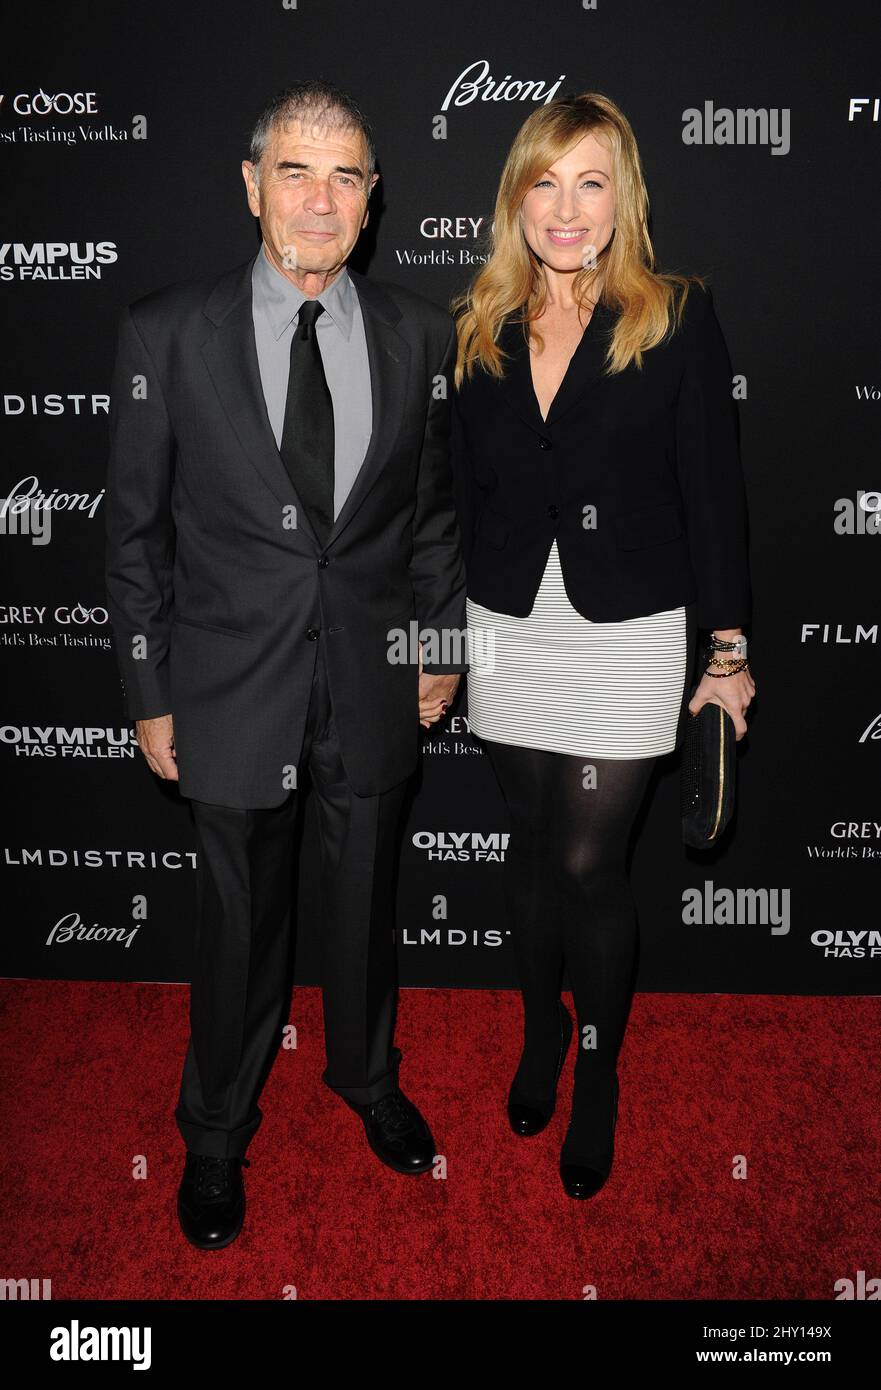 Robert Forster attending the premiere of 'Olympus Has Fallen' in Los Angeles, California. Stock Photo